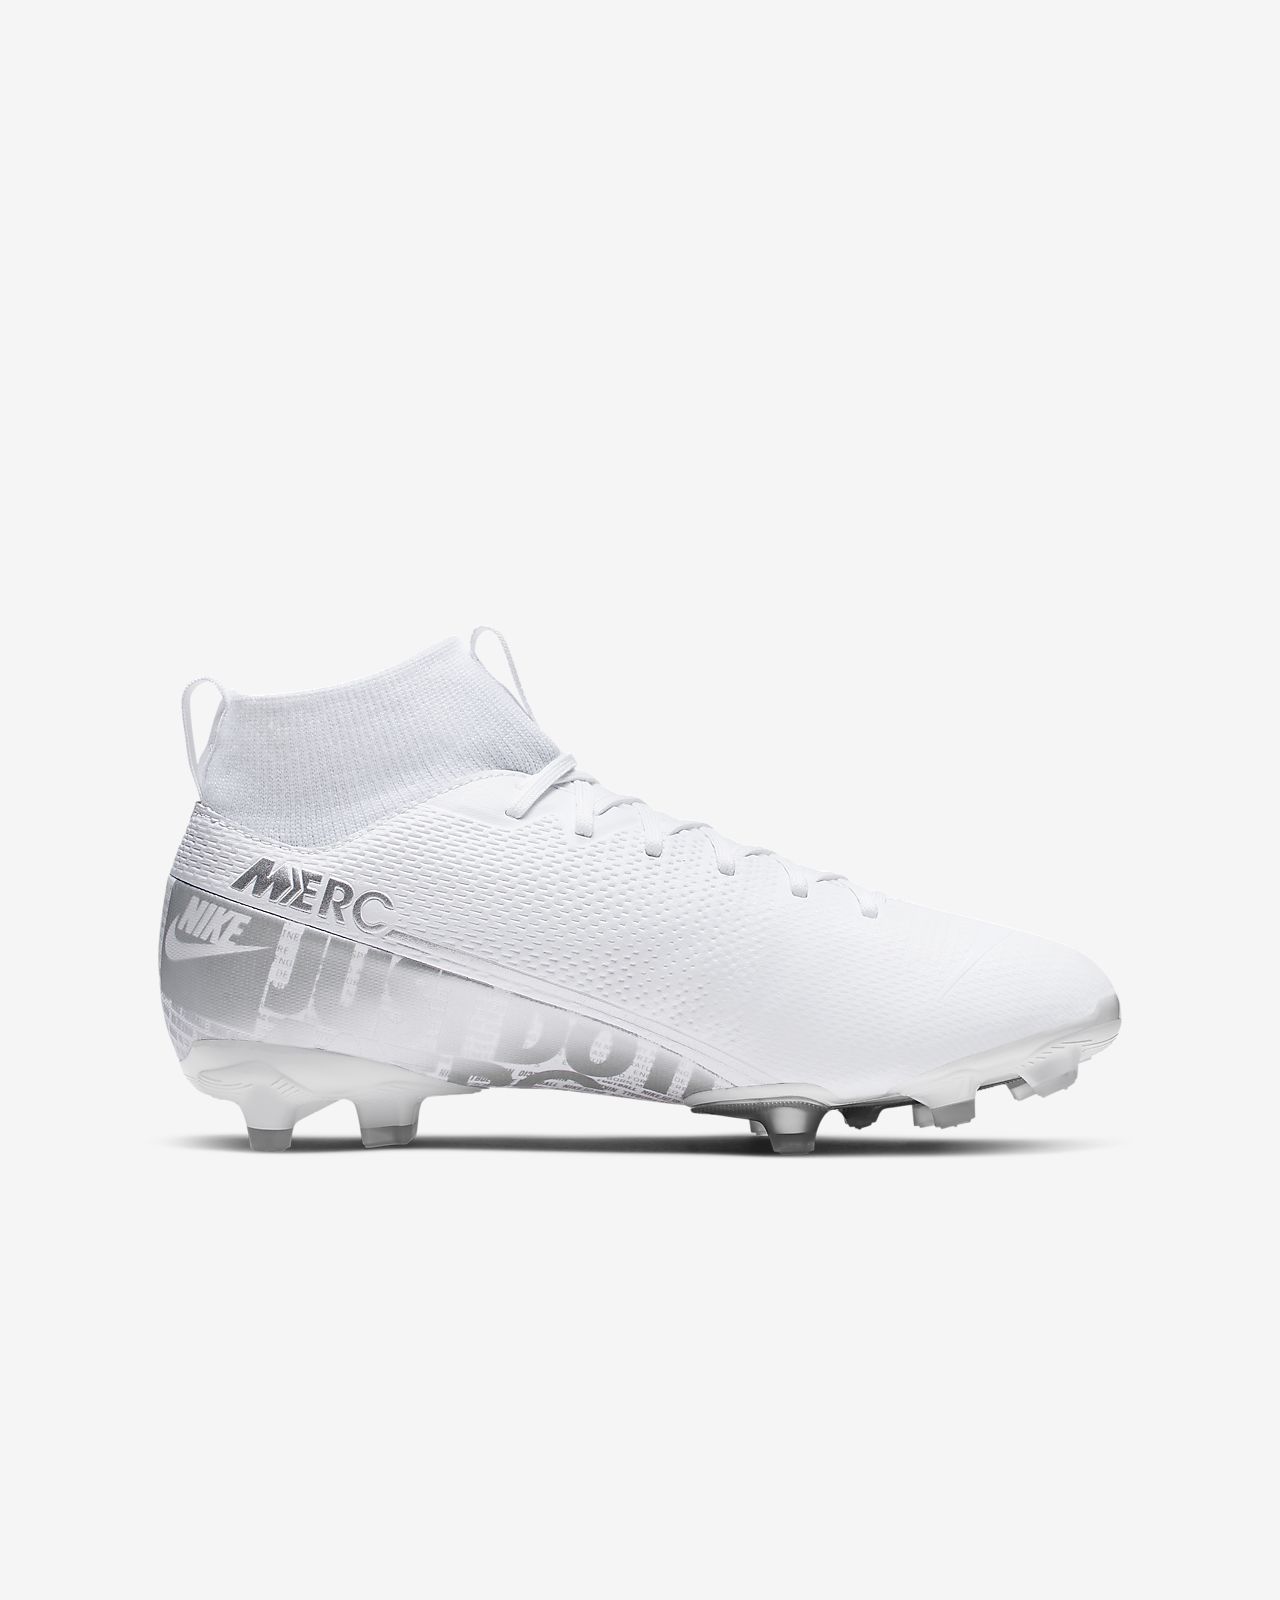 Nike Mercurial Superfly VI Academy CR7 TF Mens Boots.